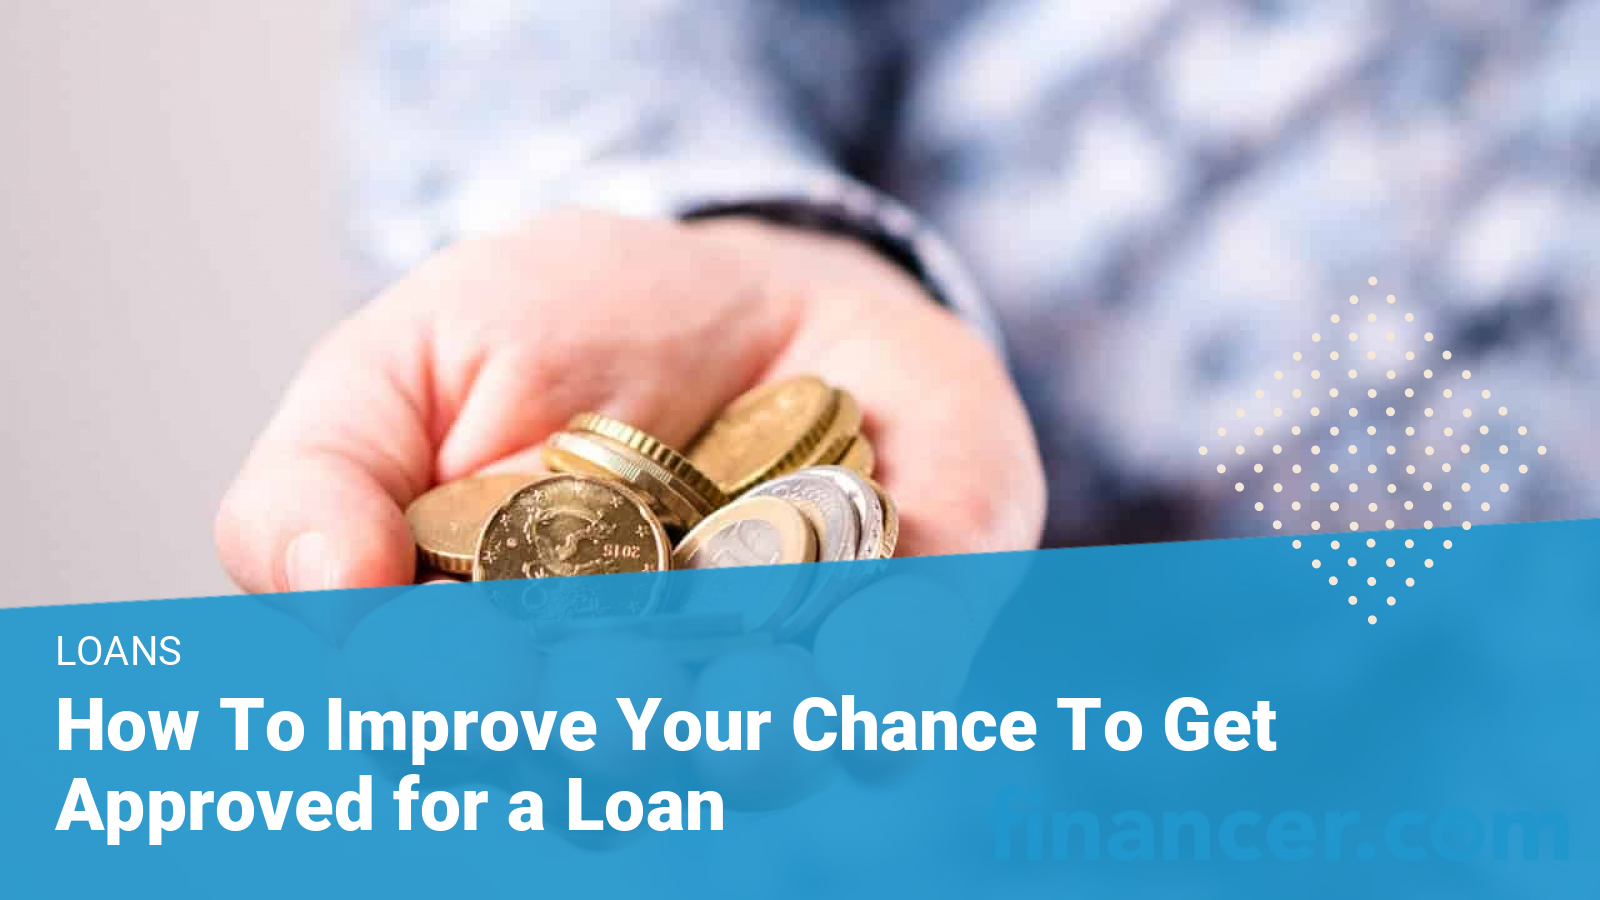 5 Ways to improve your chance of getting a personal loan